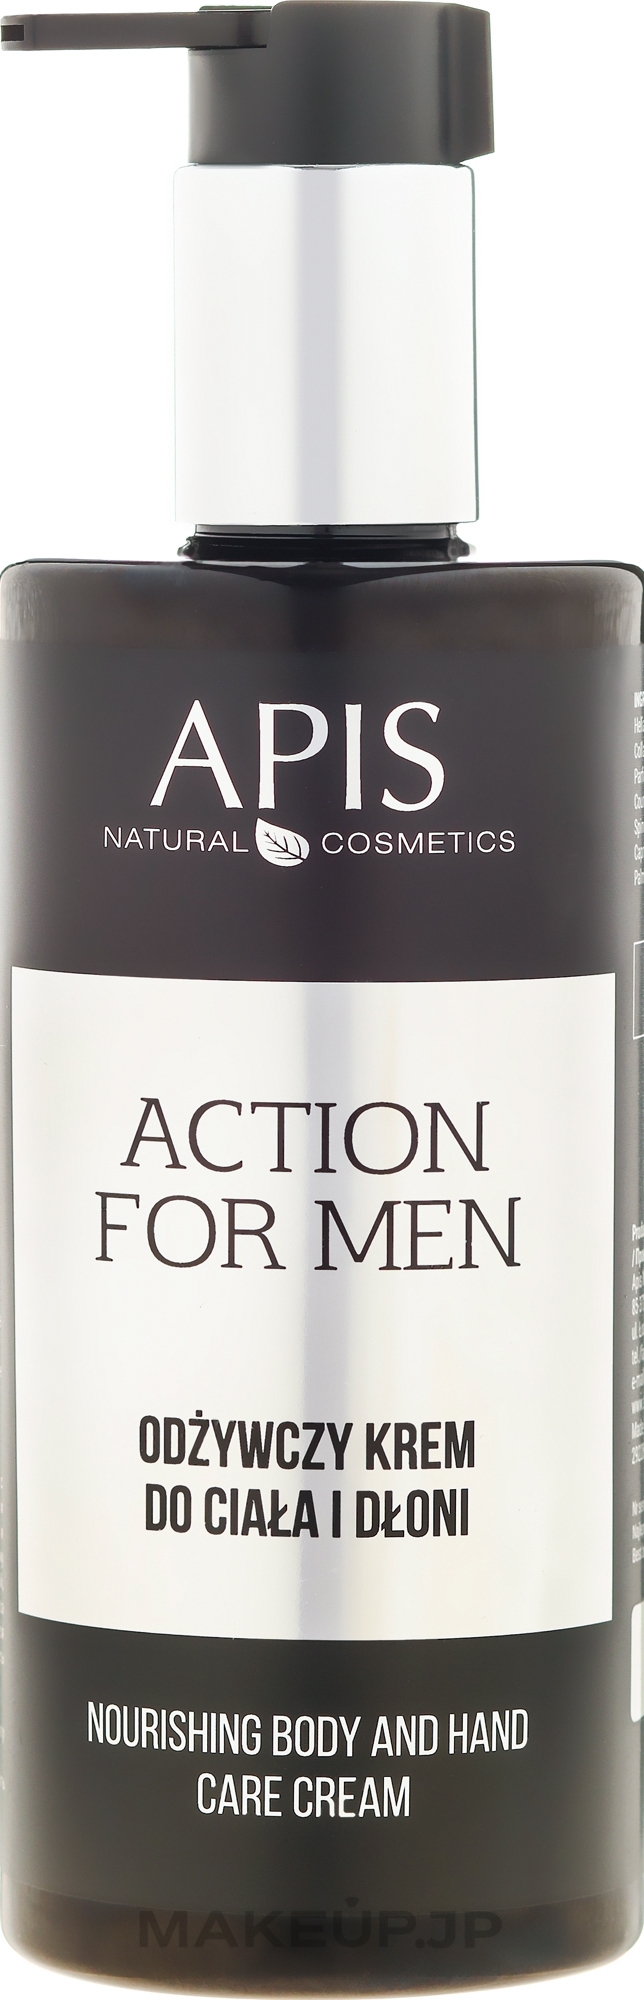 Nourishing Body and Hand Care Cream - APIS Professional Action For Men  — photo 300 ml